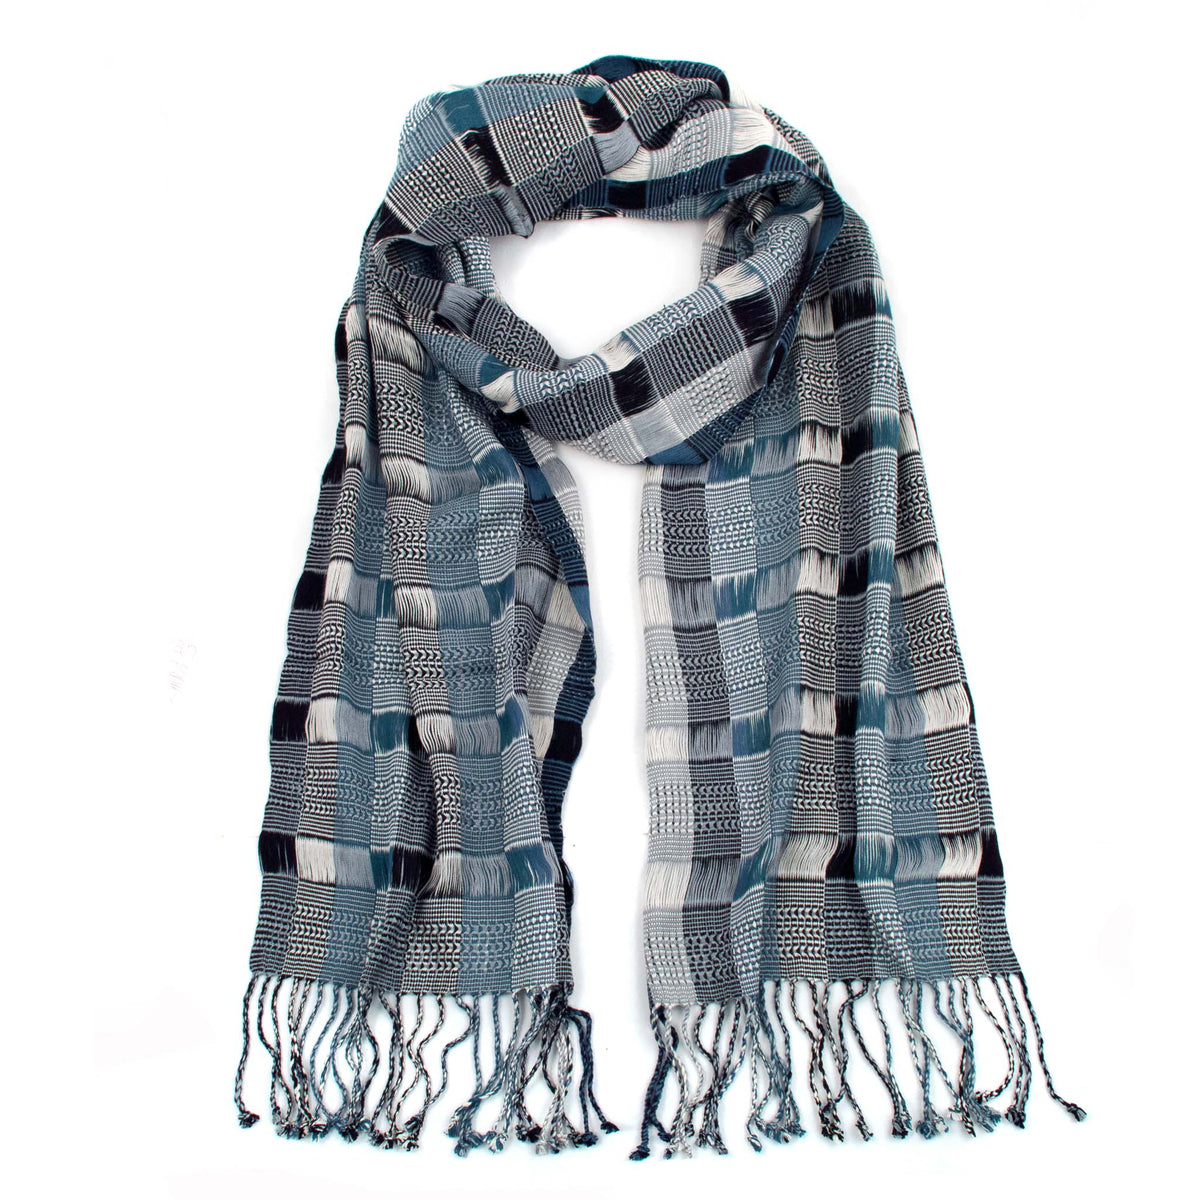 Angelina Scarf in Steel Blue and Gray, made from rayon threads with twisted fringe. The scarf is laid flat, wrapped with a circle on white background.